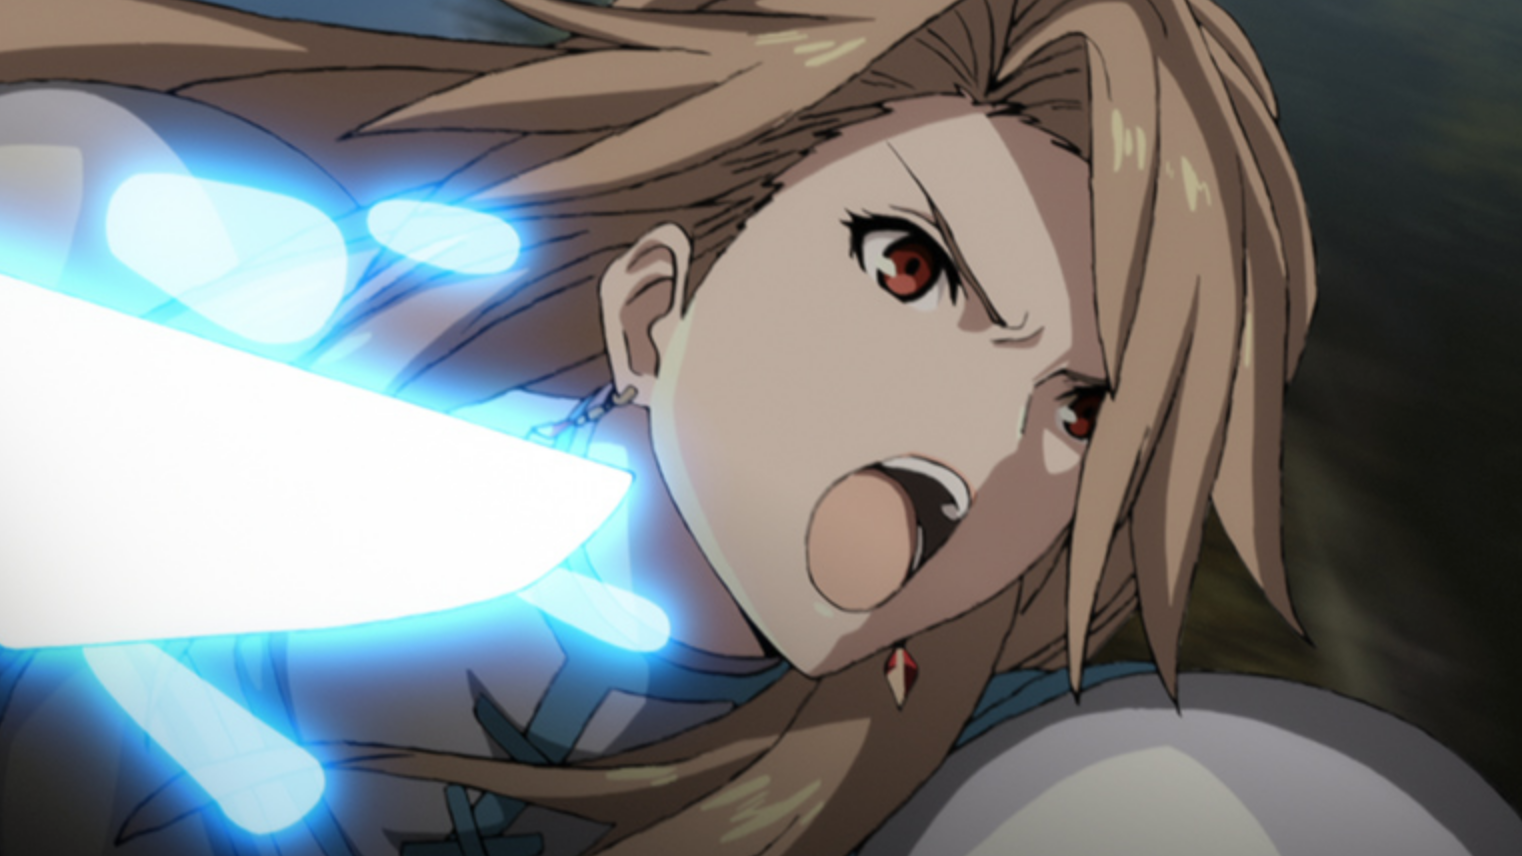 Katalina Voice - Granblue Fantasy: The Animation (TV Show) - Behind The Voice  Actors